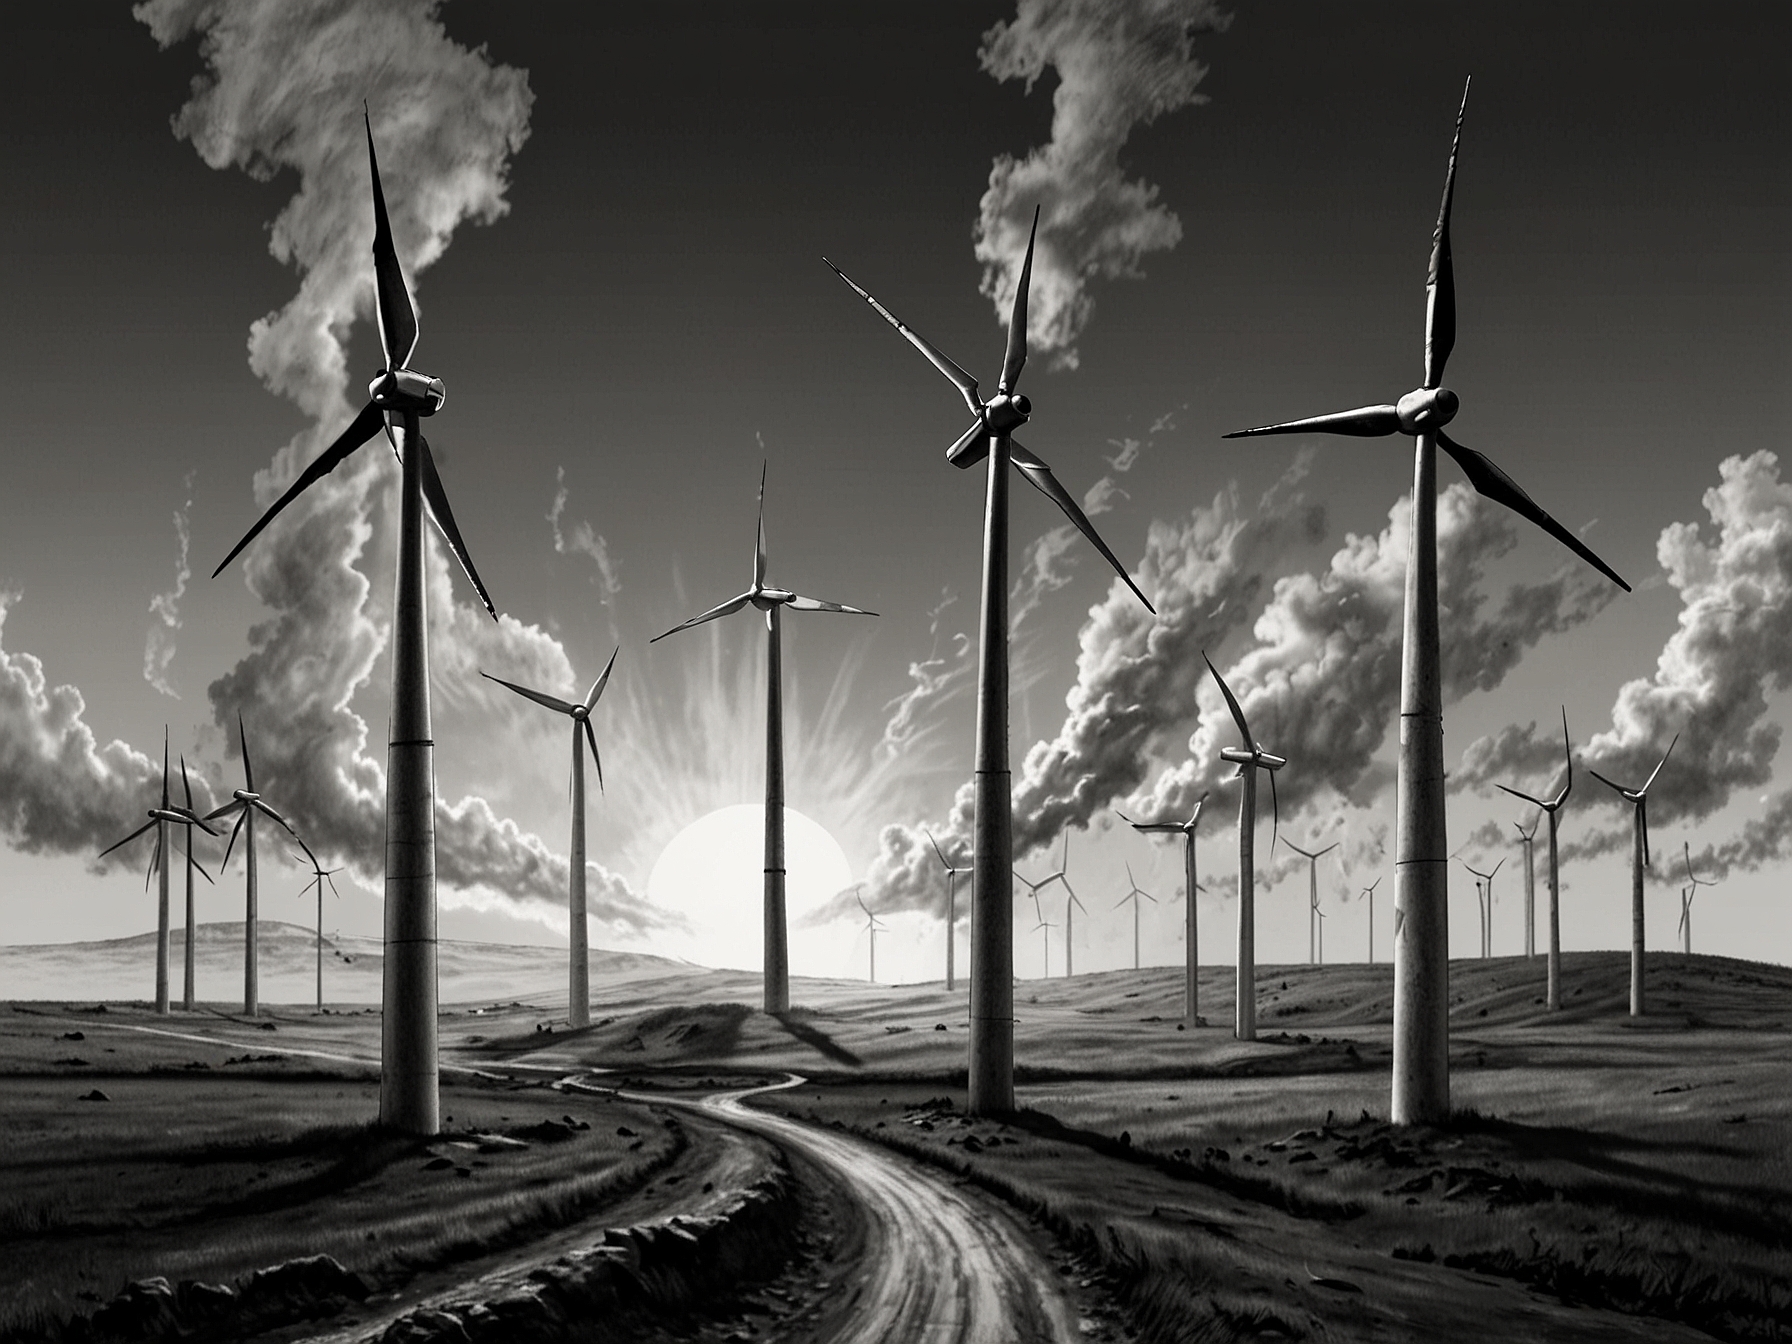 A conceptual image portraying the debate between fossil fuels and renewable energy, with one side focusing on CCS technology in oil production, and the other advocating for wind and solar power investments to combat climate change.